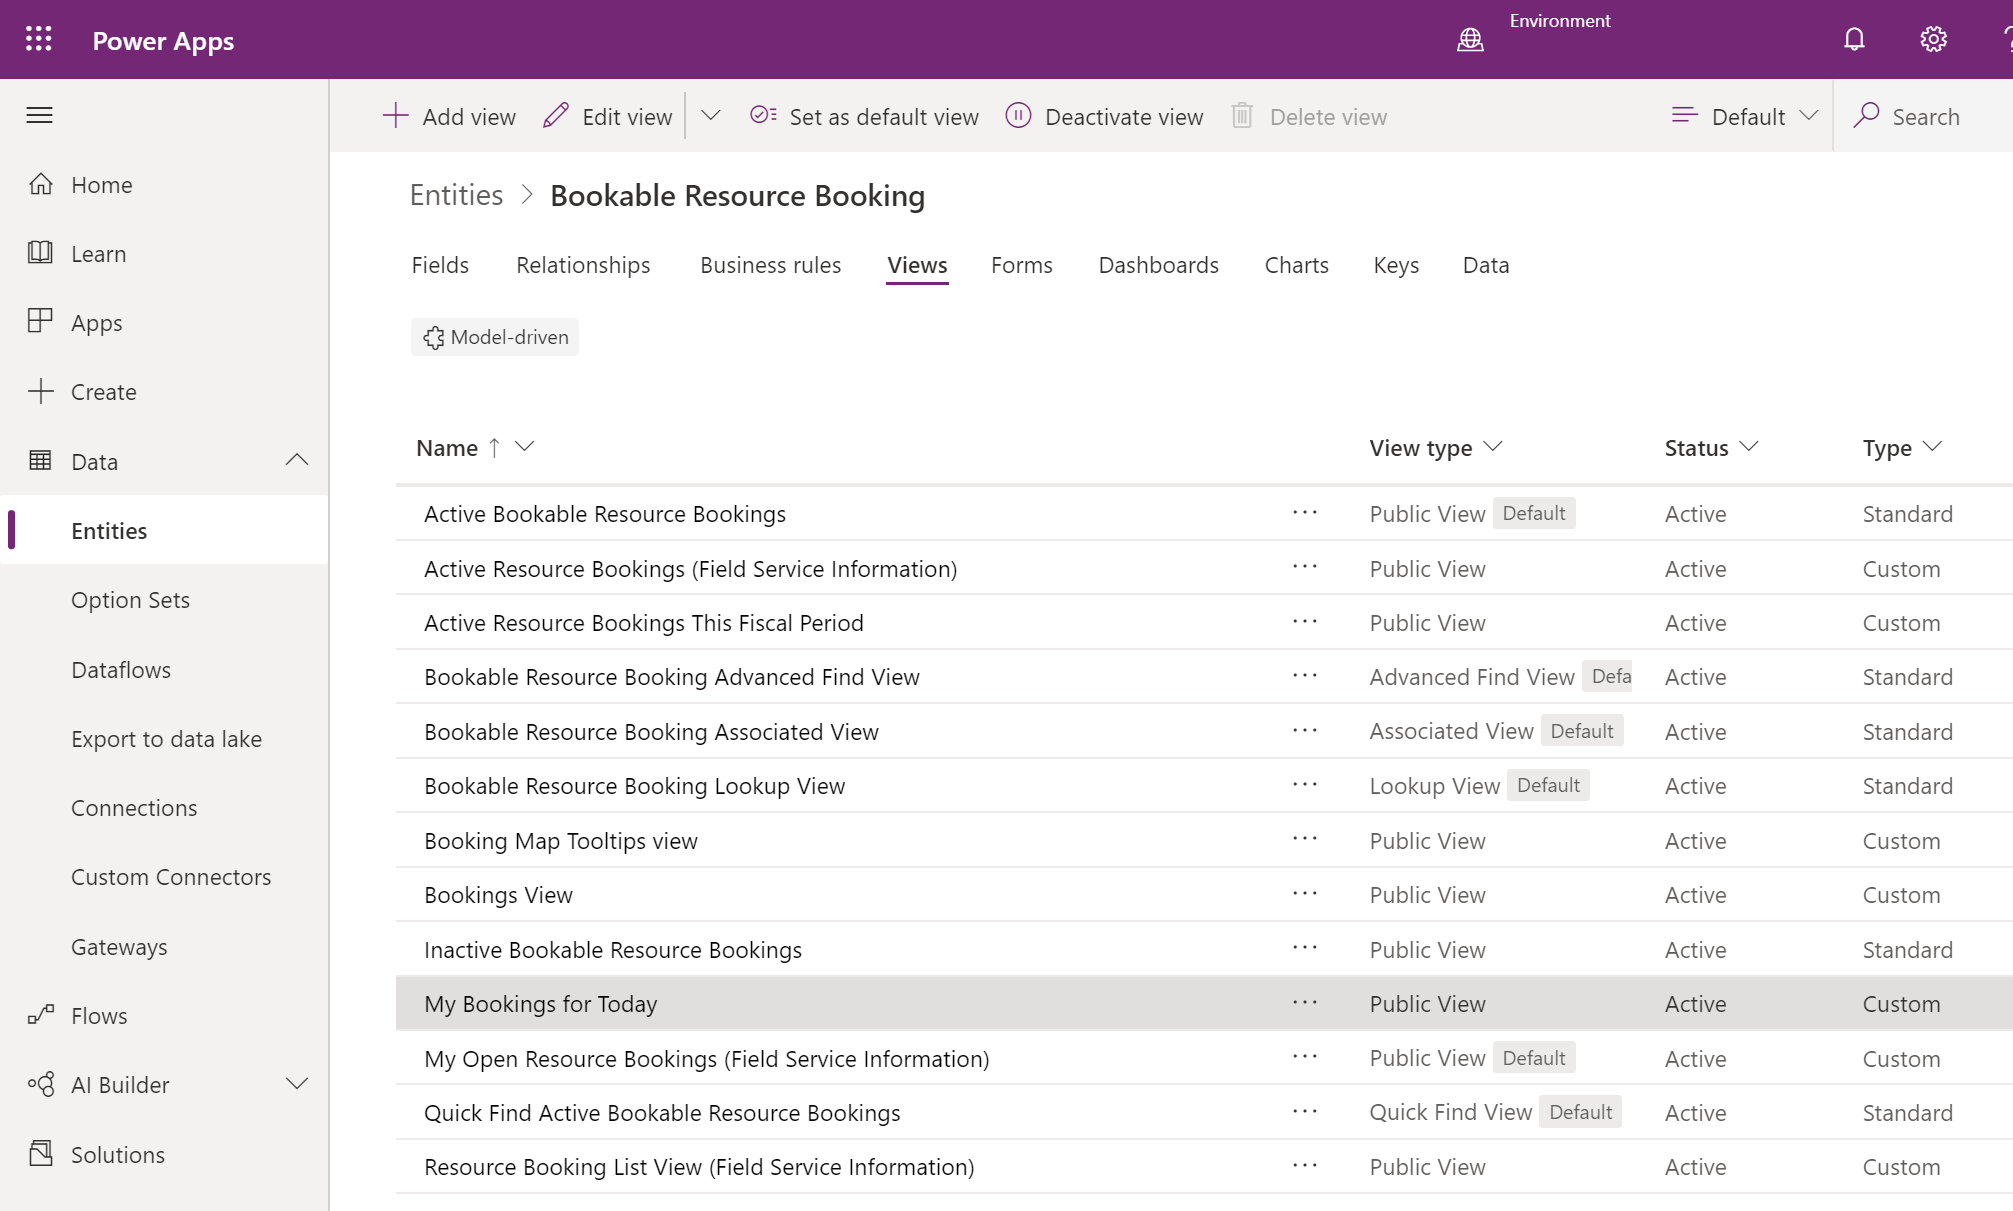 Screenshot of Bookable Resource Booking entity with In progress status.